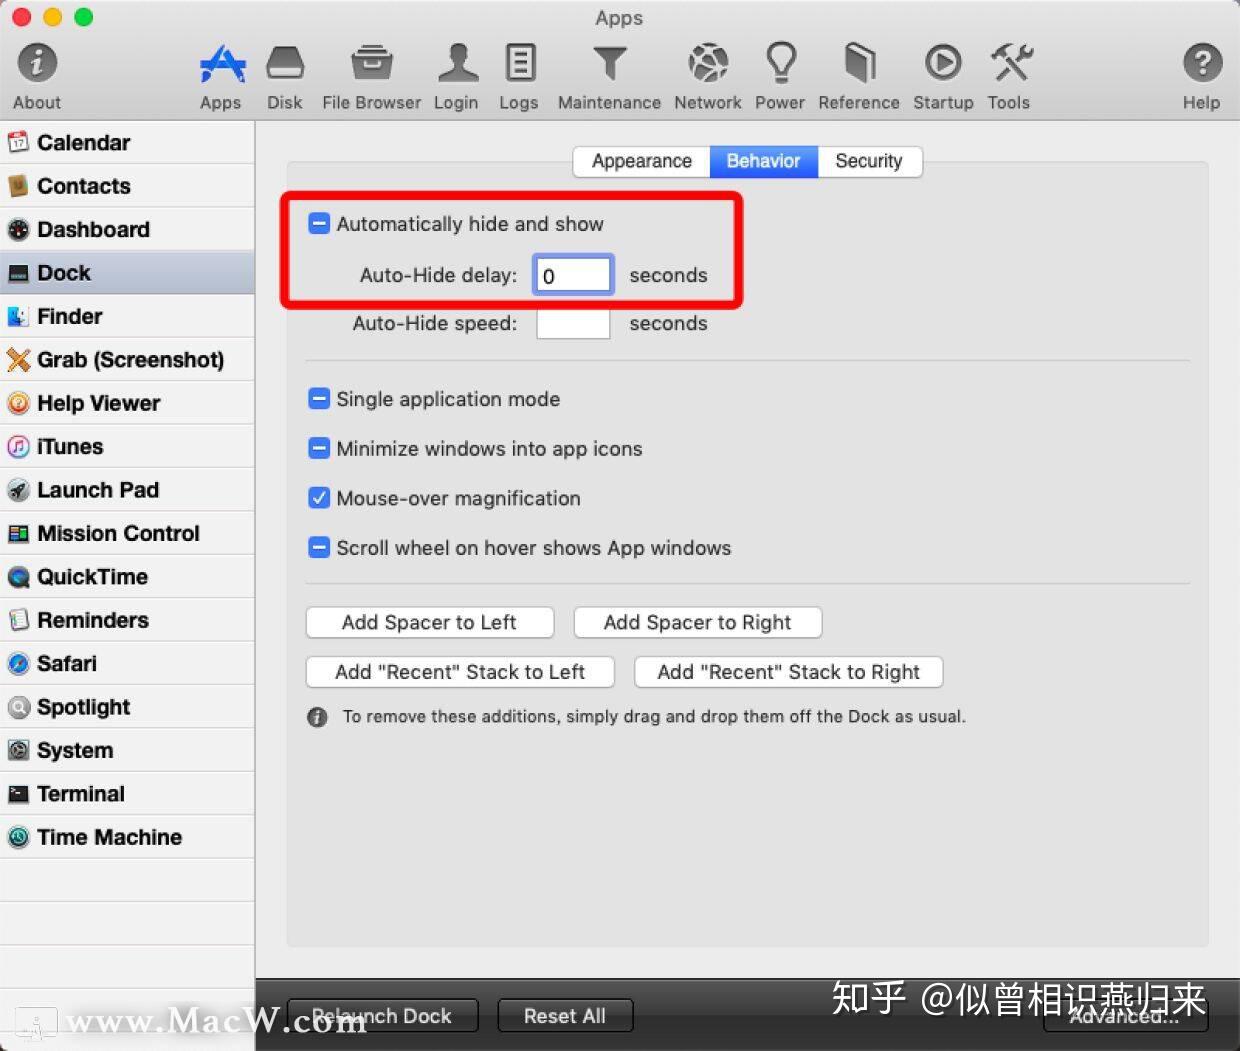 download the new version for mac MacPilot